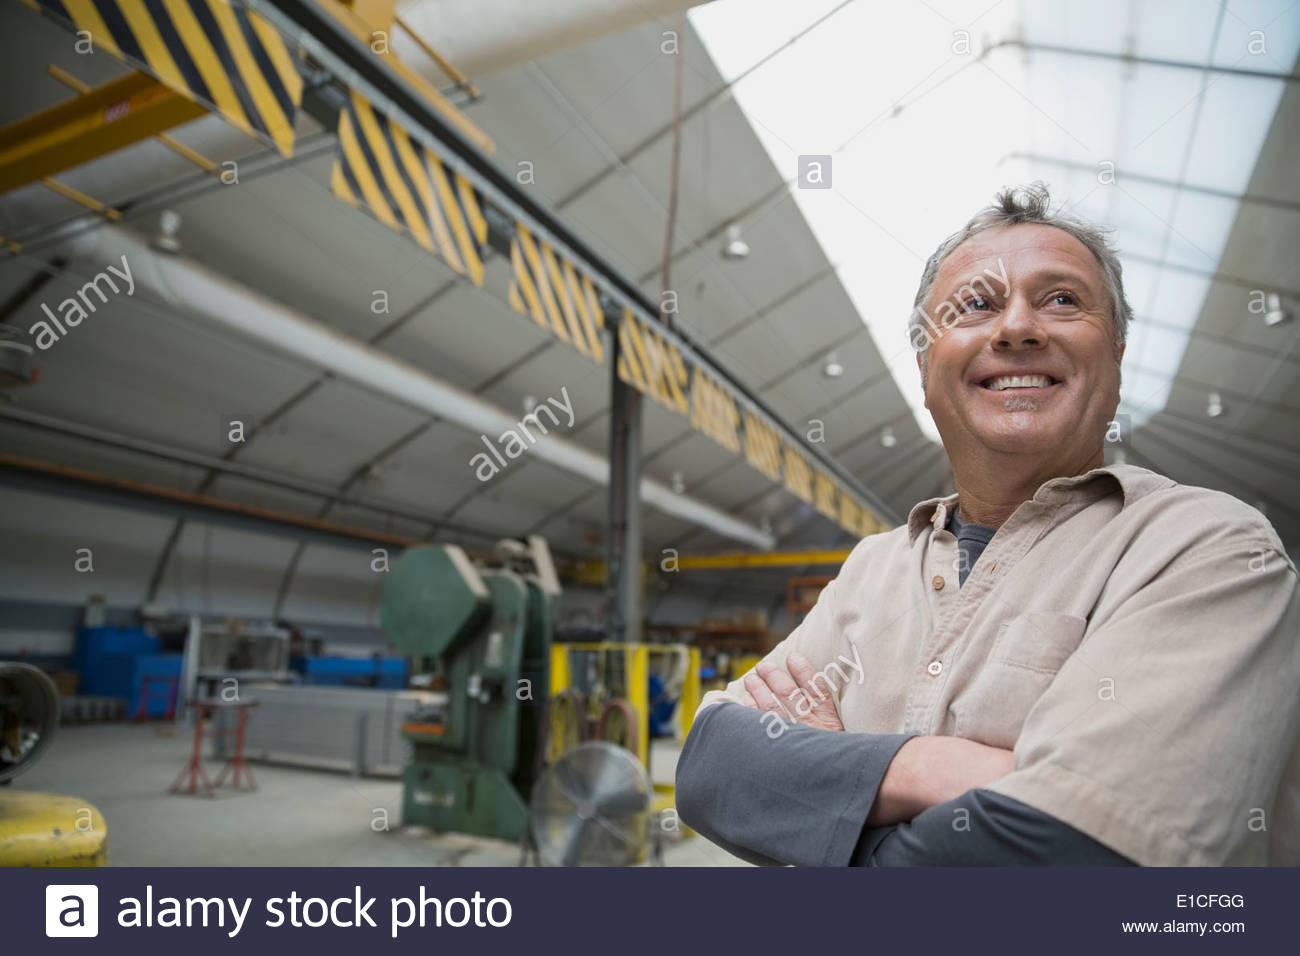 Smiling worker in manufacturing plant Stock Photo